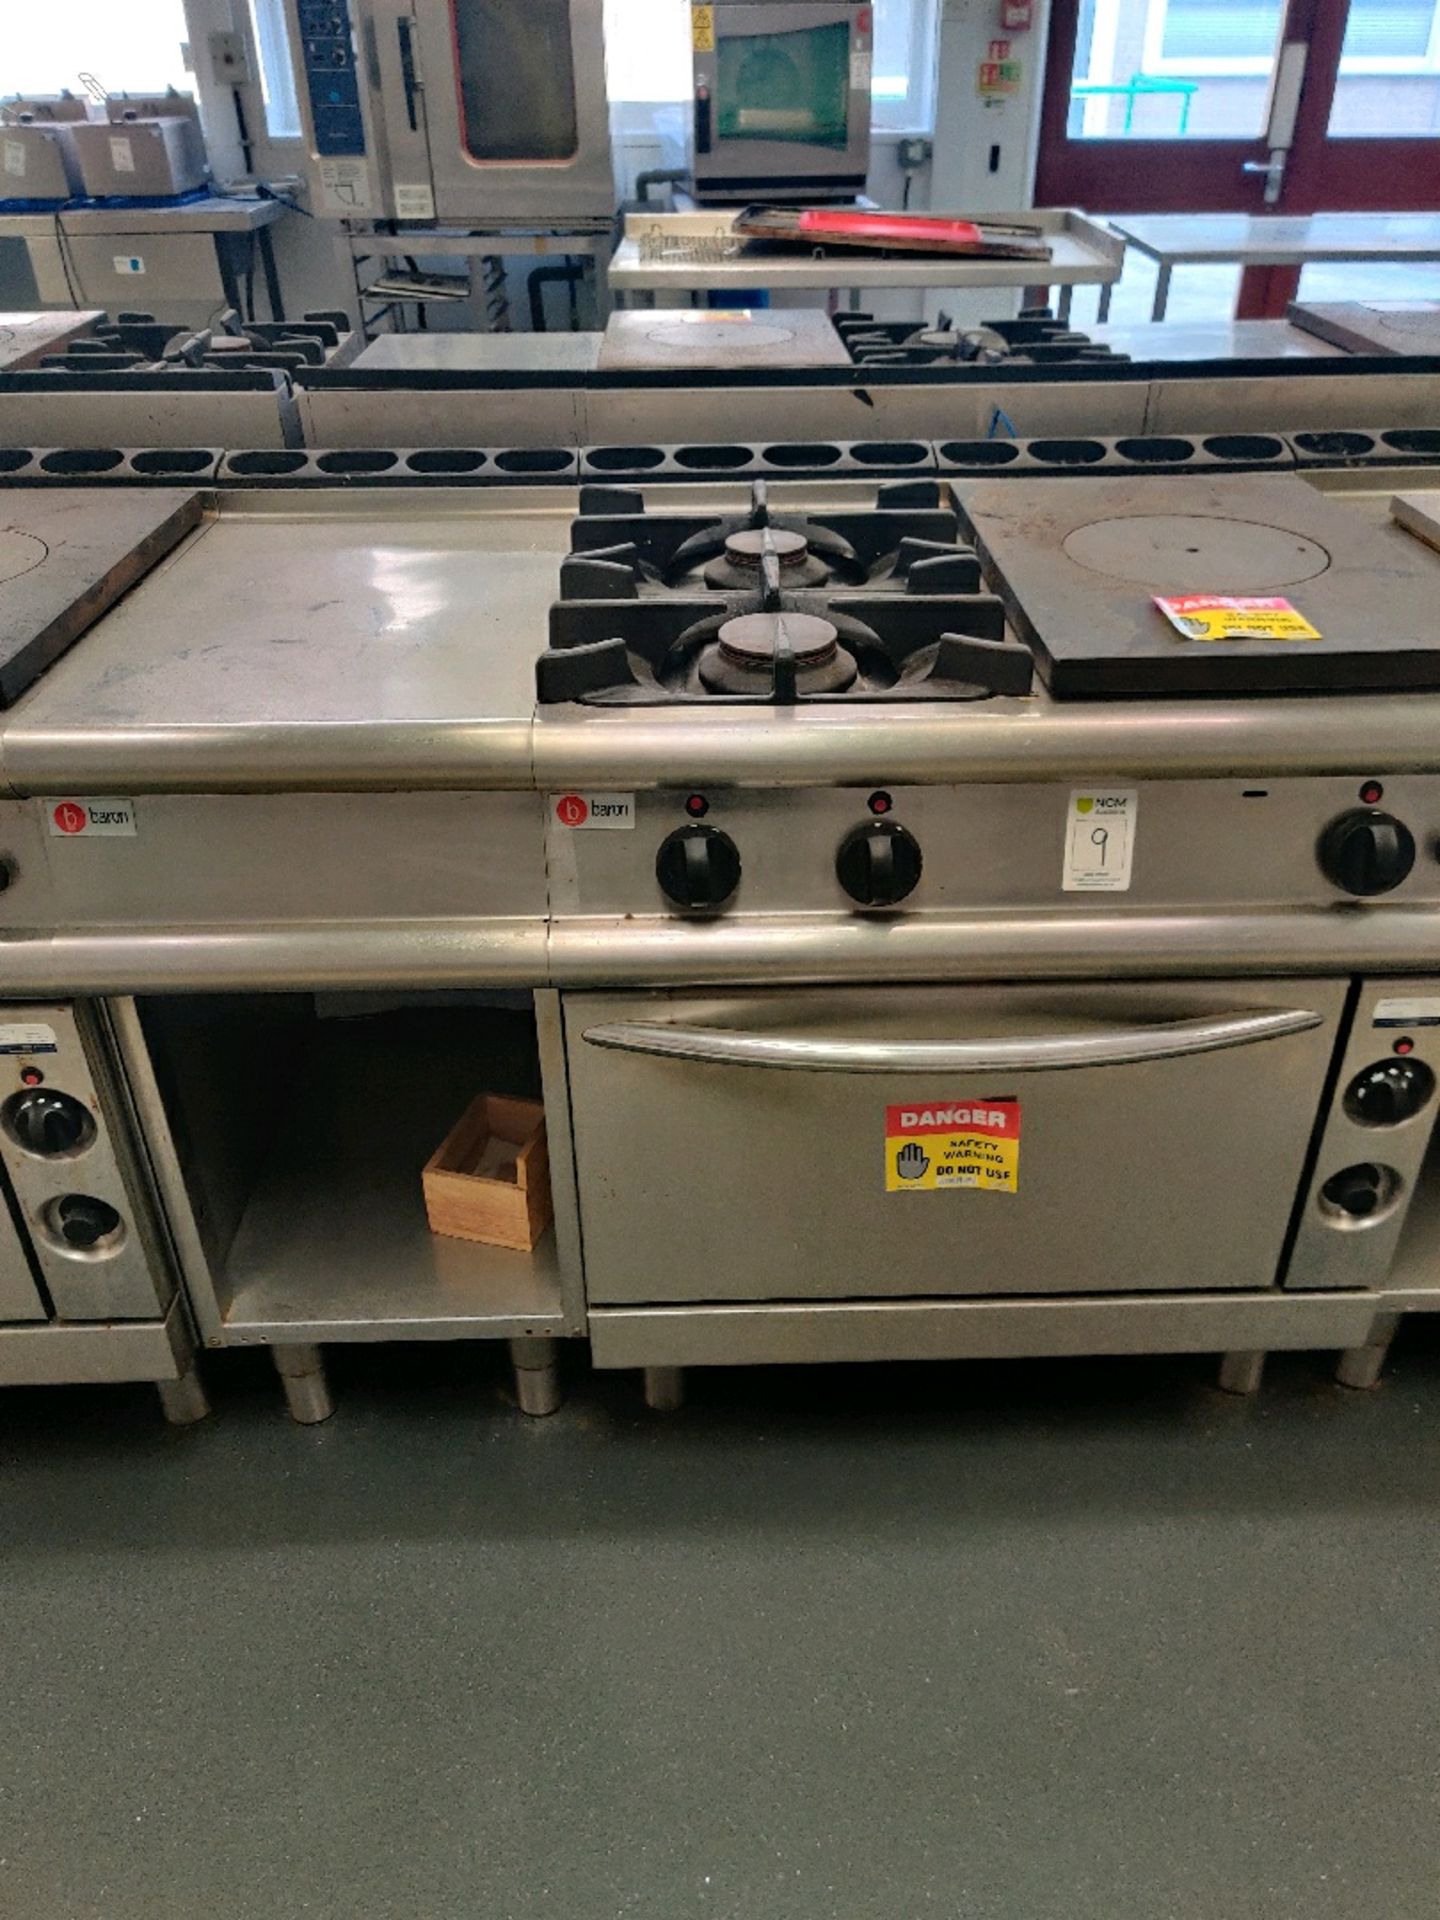 Baron 2 Gas hob, hot plate and oven with side